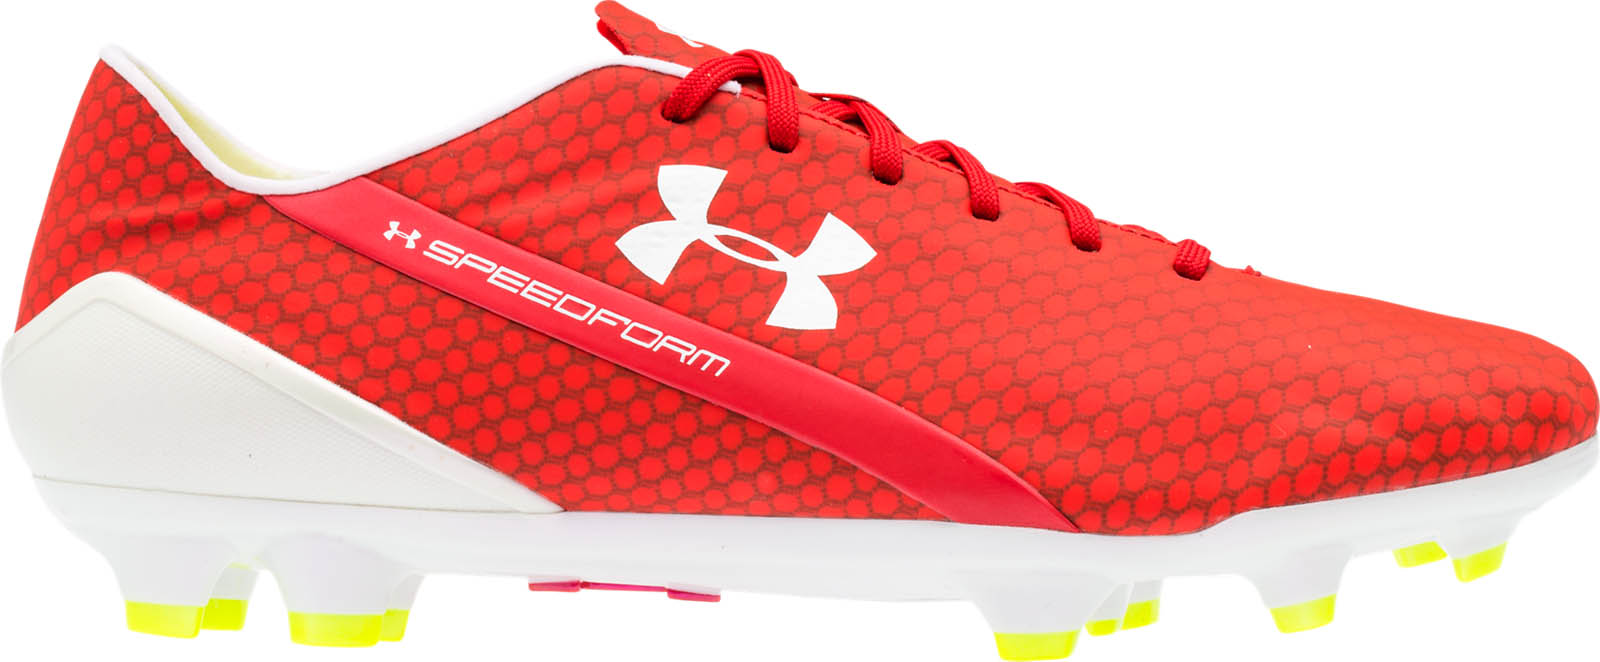 Red Under Armour Speedform 2015-2016 Boots Released - Footy Headlines